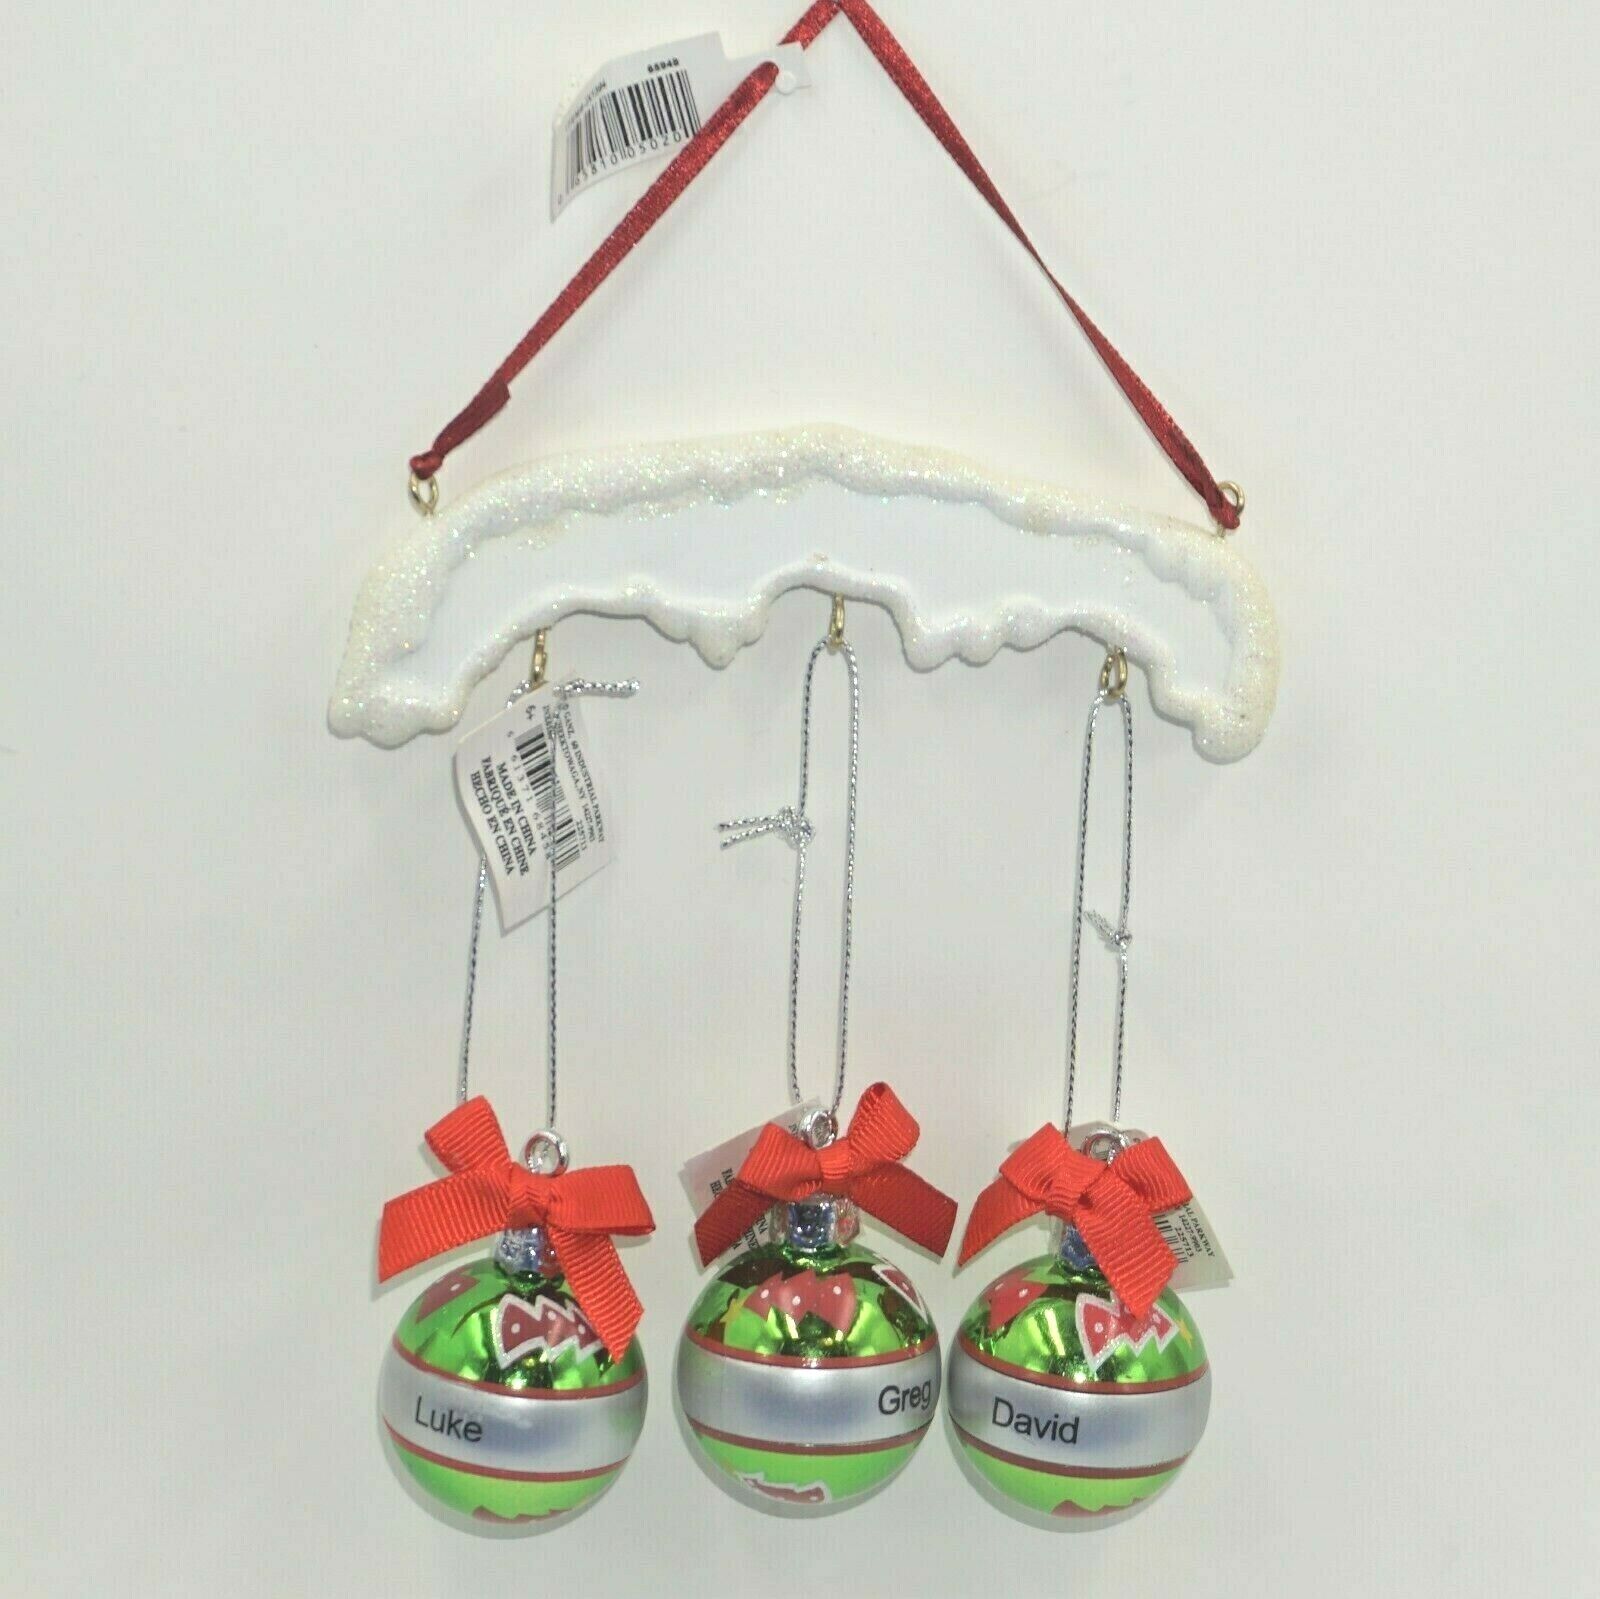 Ganz Christmas Ornament Hanger Holder White Glitter Snow Holds 3 Can Personalize